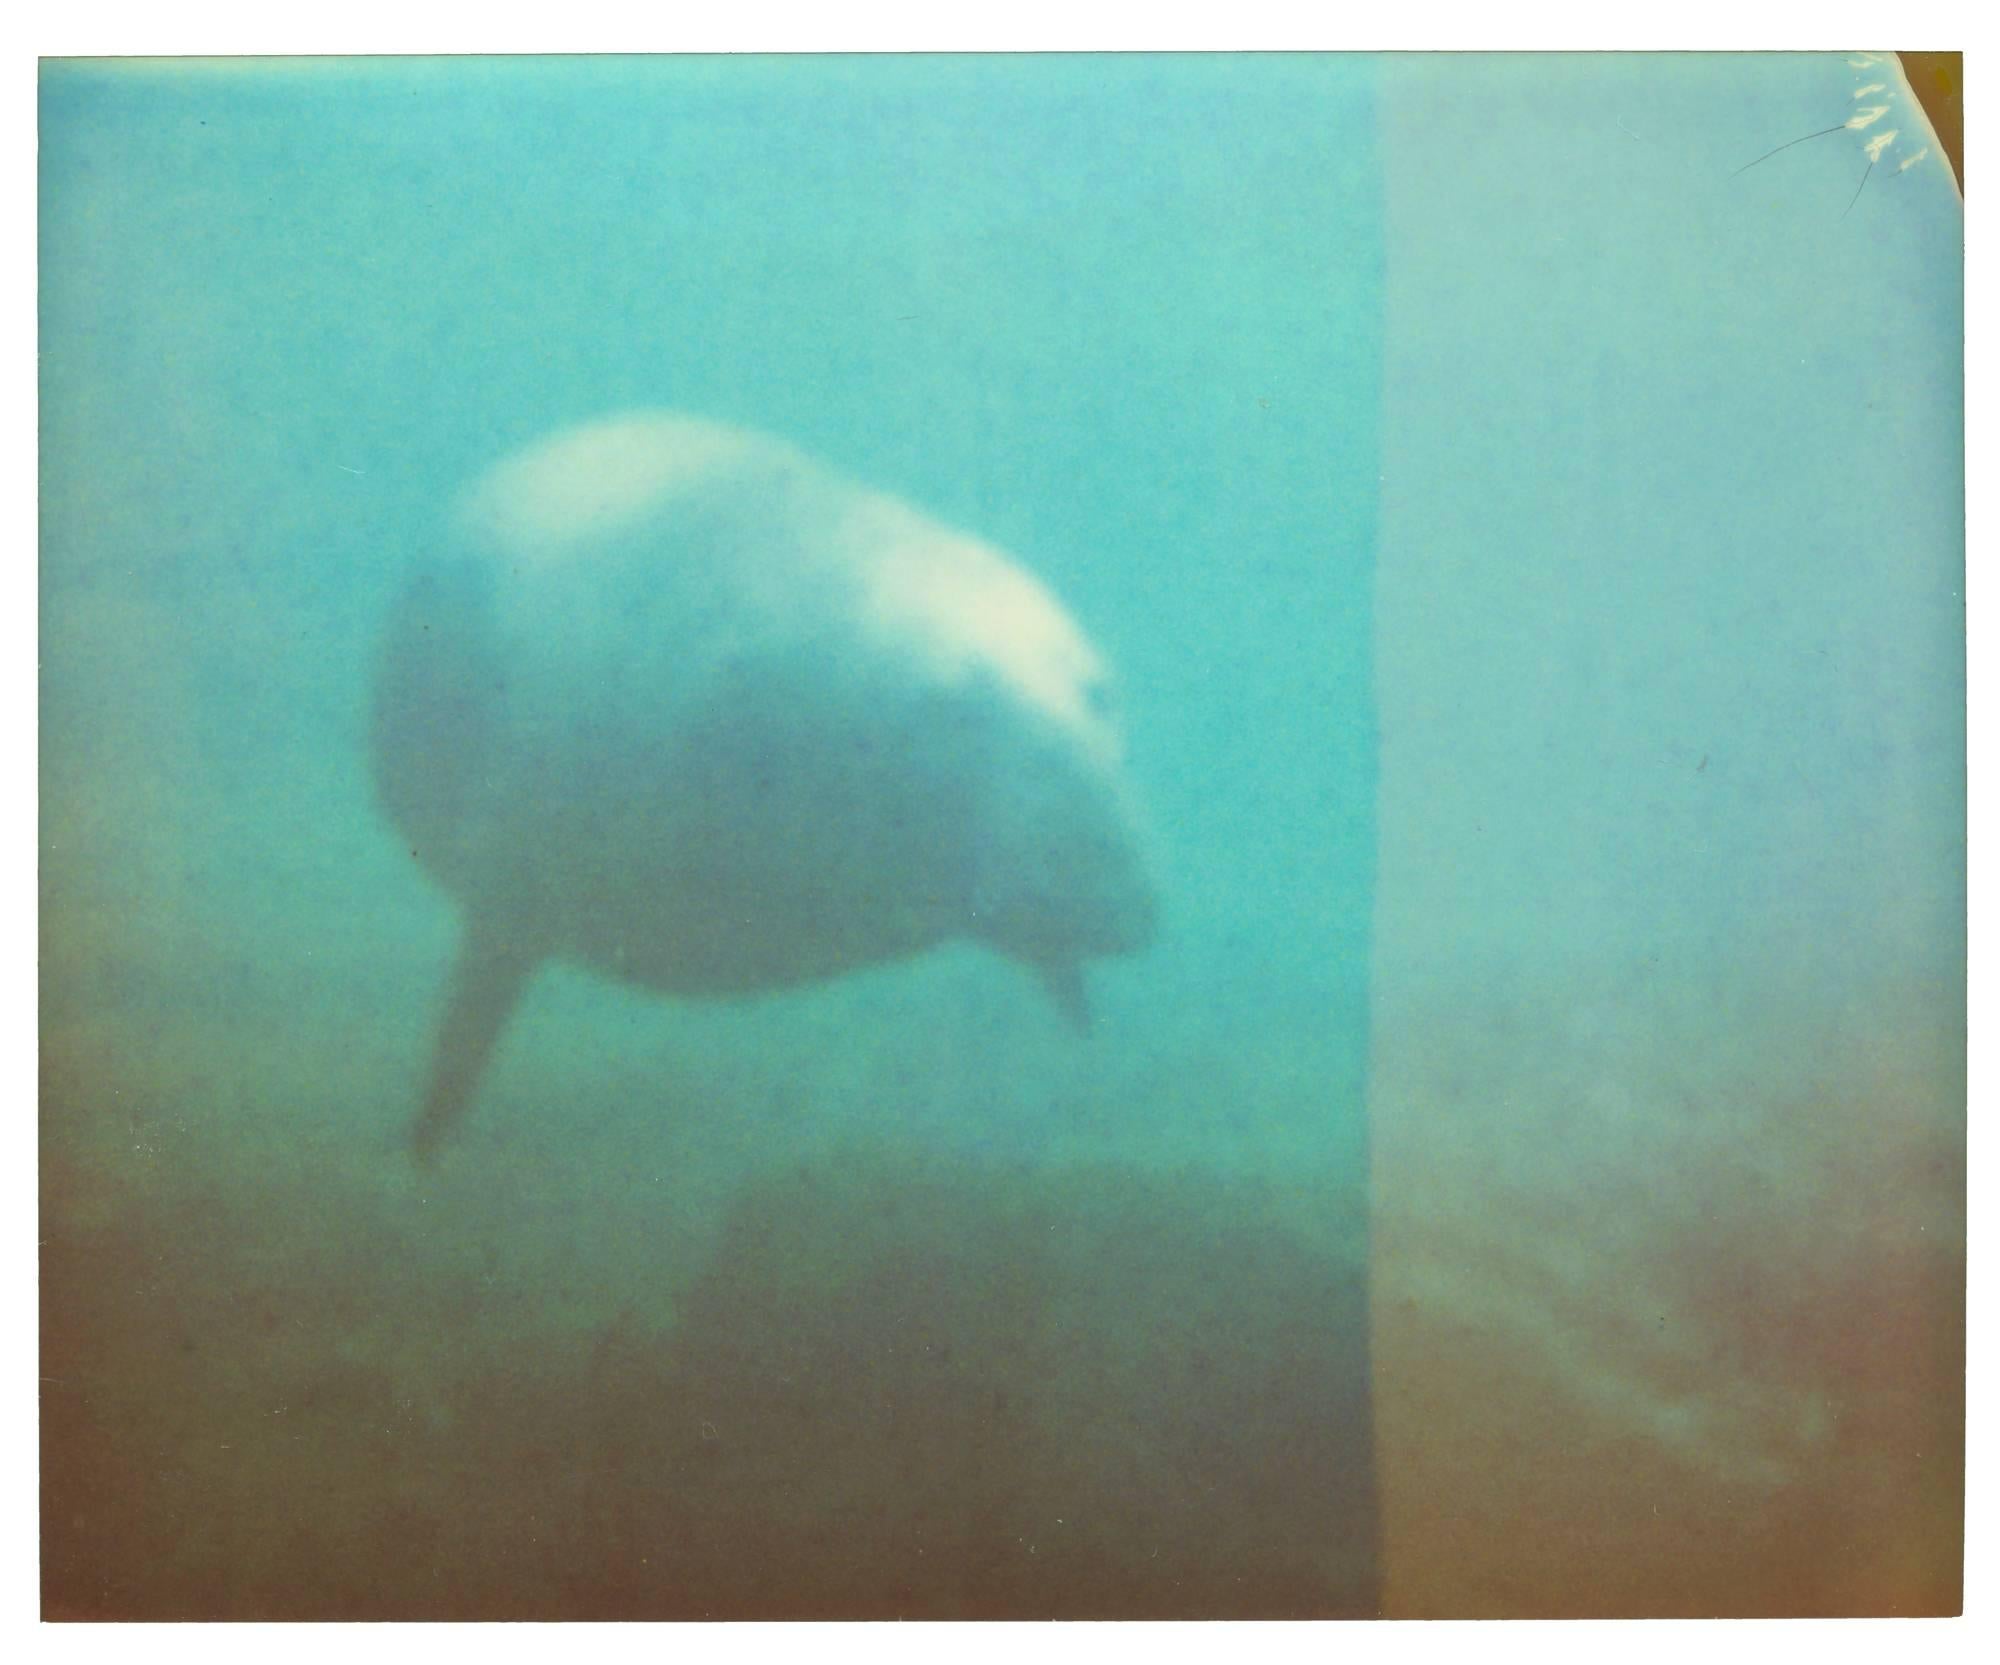 Stefanie Schneider Color Photograph - Dugong - Stay, Contemporary, Abstract, Landscape, USA, Polaroid, Photograph